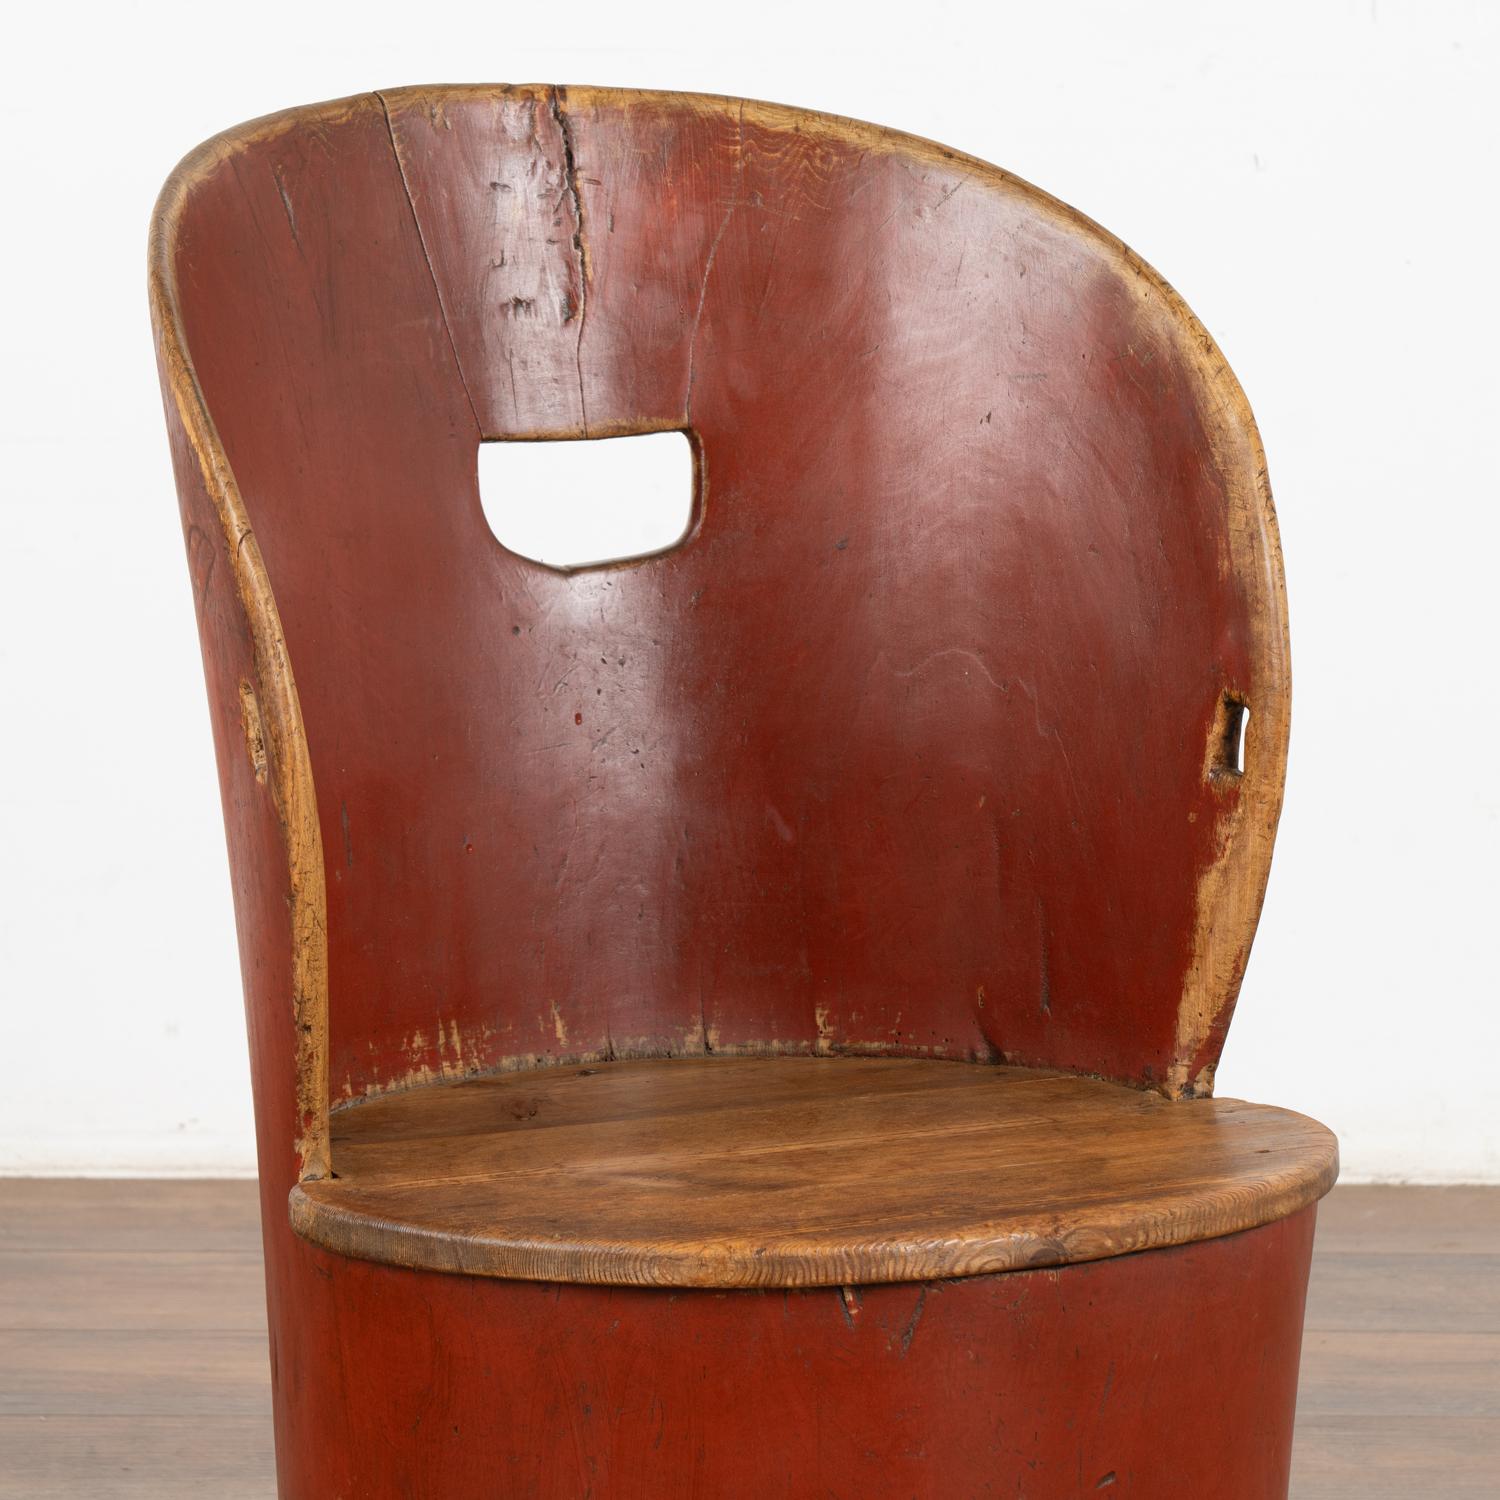 Swedish Original Red Painted Kubbestol Log Chair, Sweden circa 1860-80 For Sale